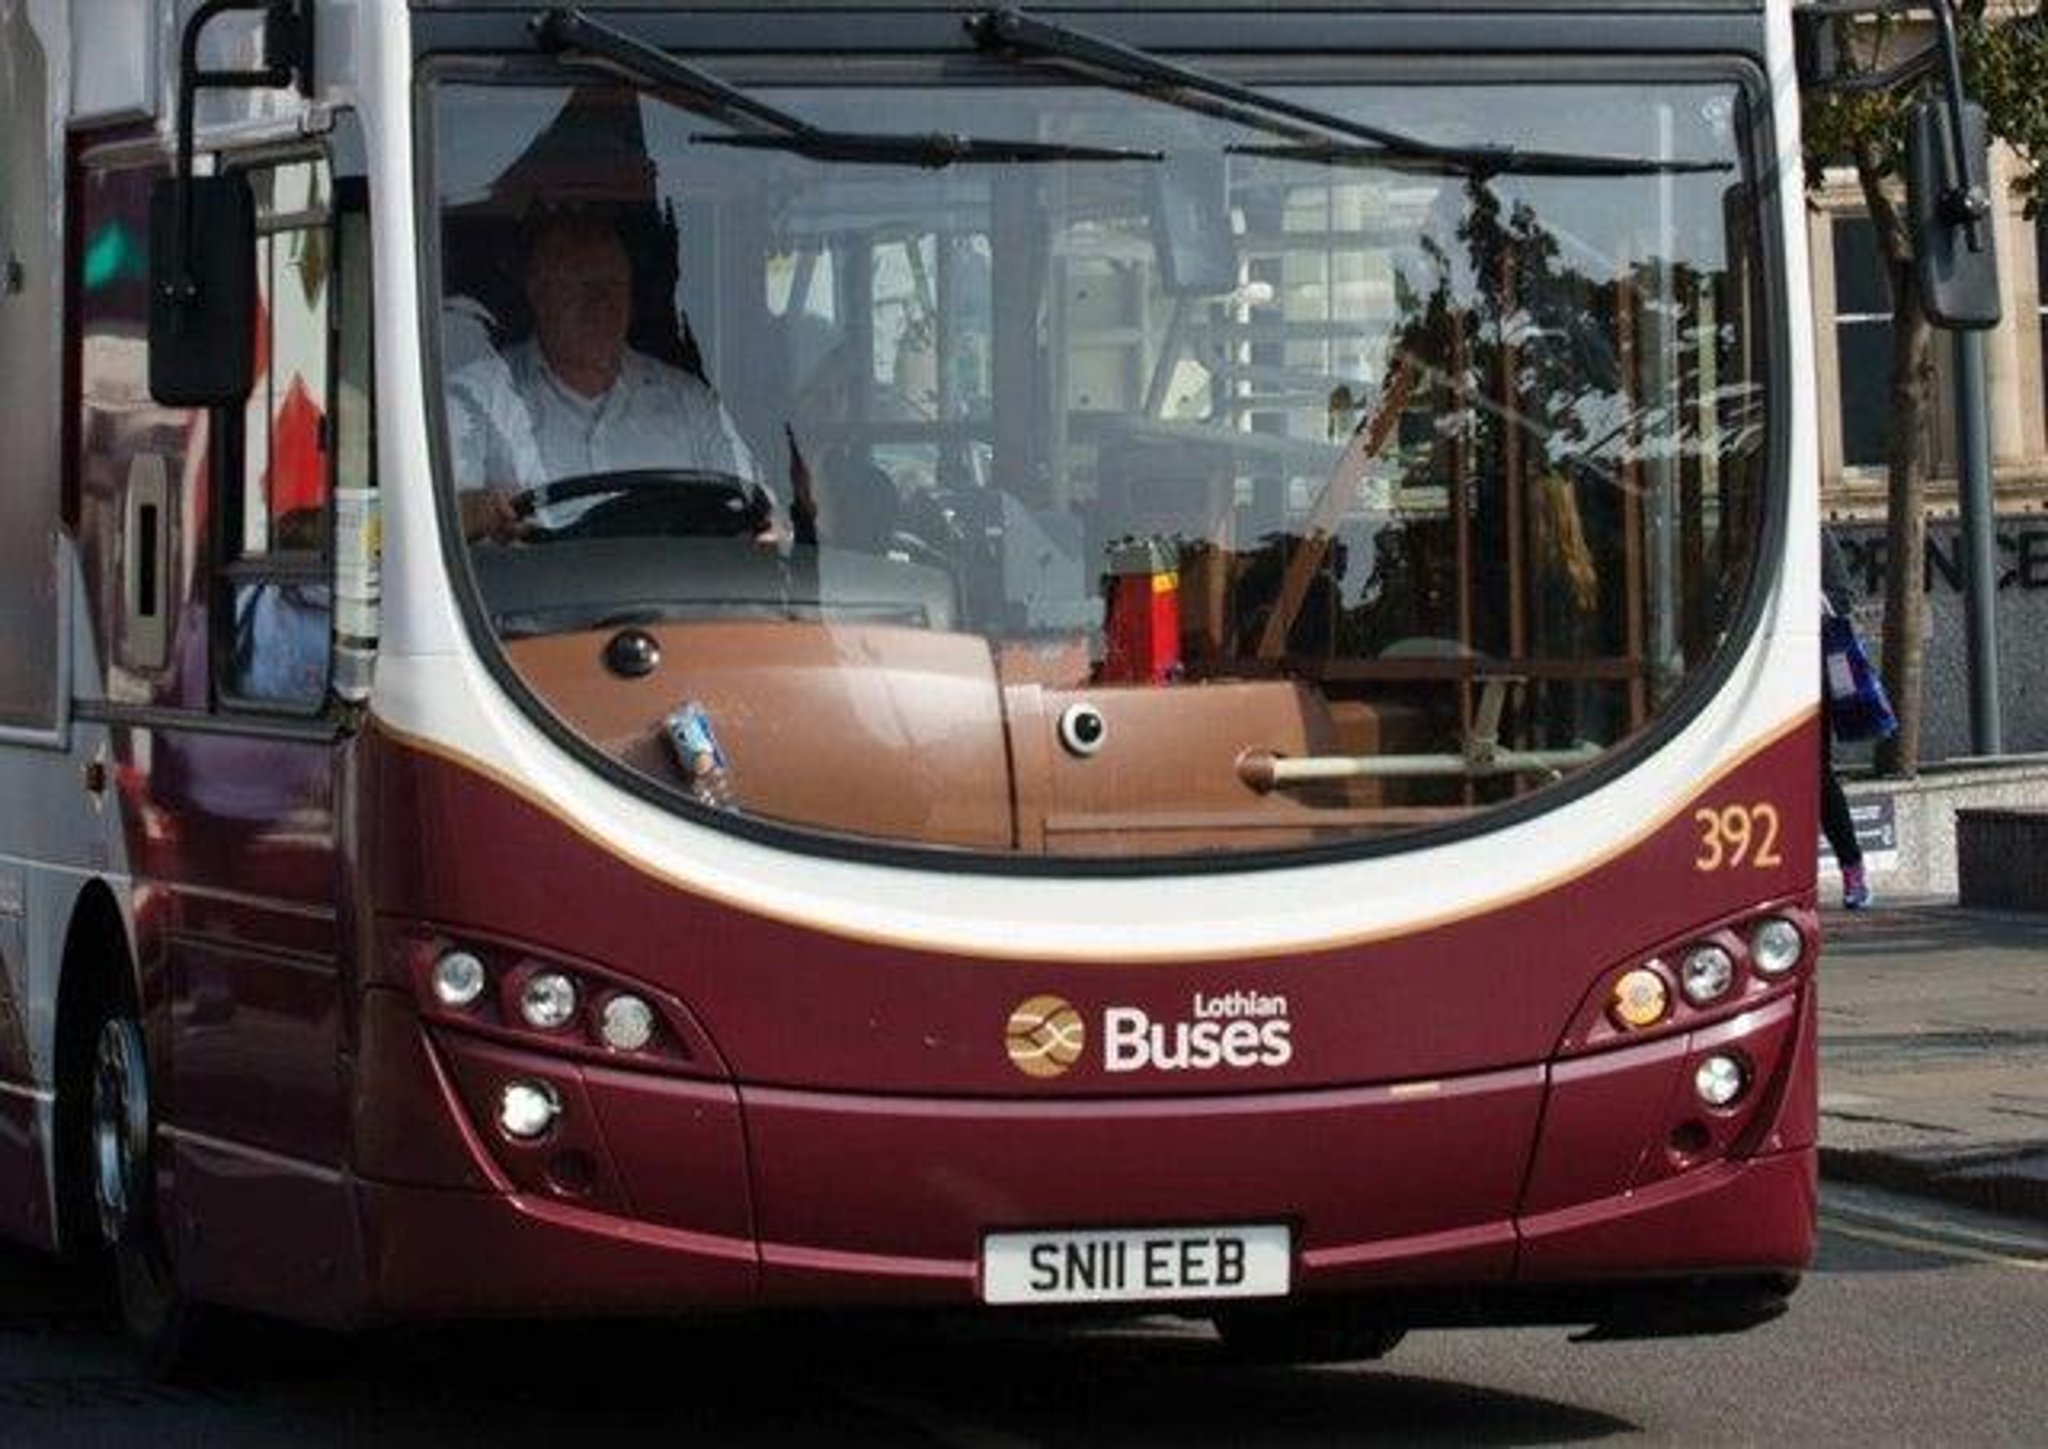 Police are hunting culprits after an Edinburgh bus had its window smashed on Sunday